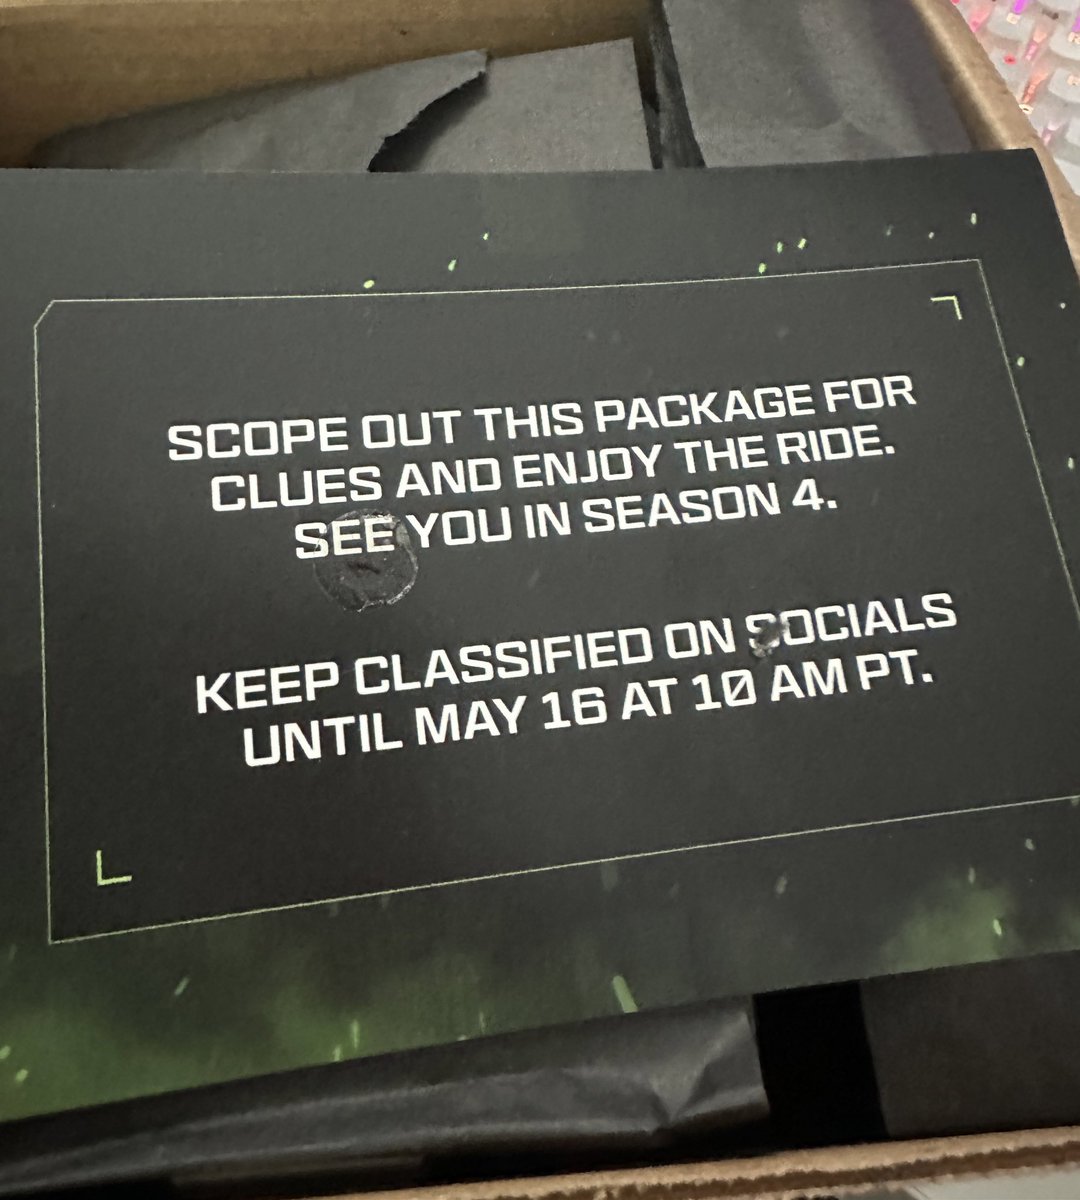 Well looks like there may be some teasers for MW3 x Warzone Season 4 tomorrow, May 16 at 10am PT

Some creators have received a package with “Keep classified on socials until May 16 at 10am PT”